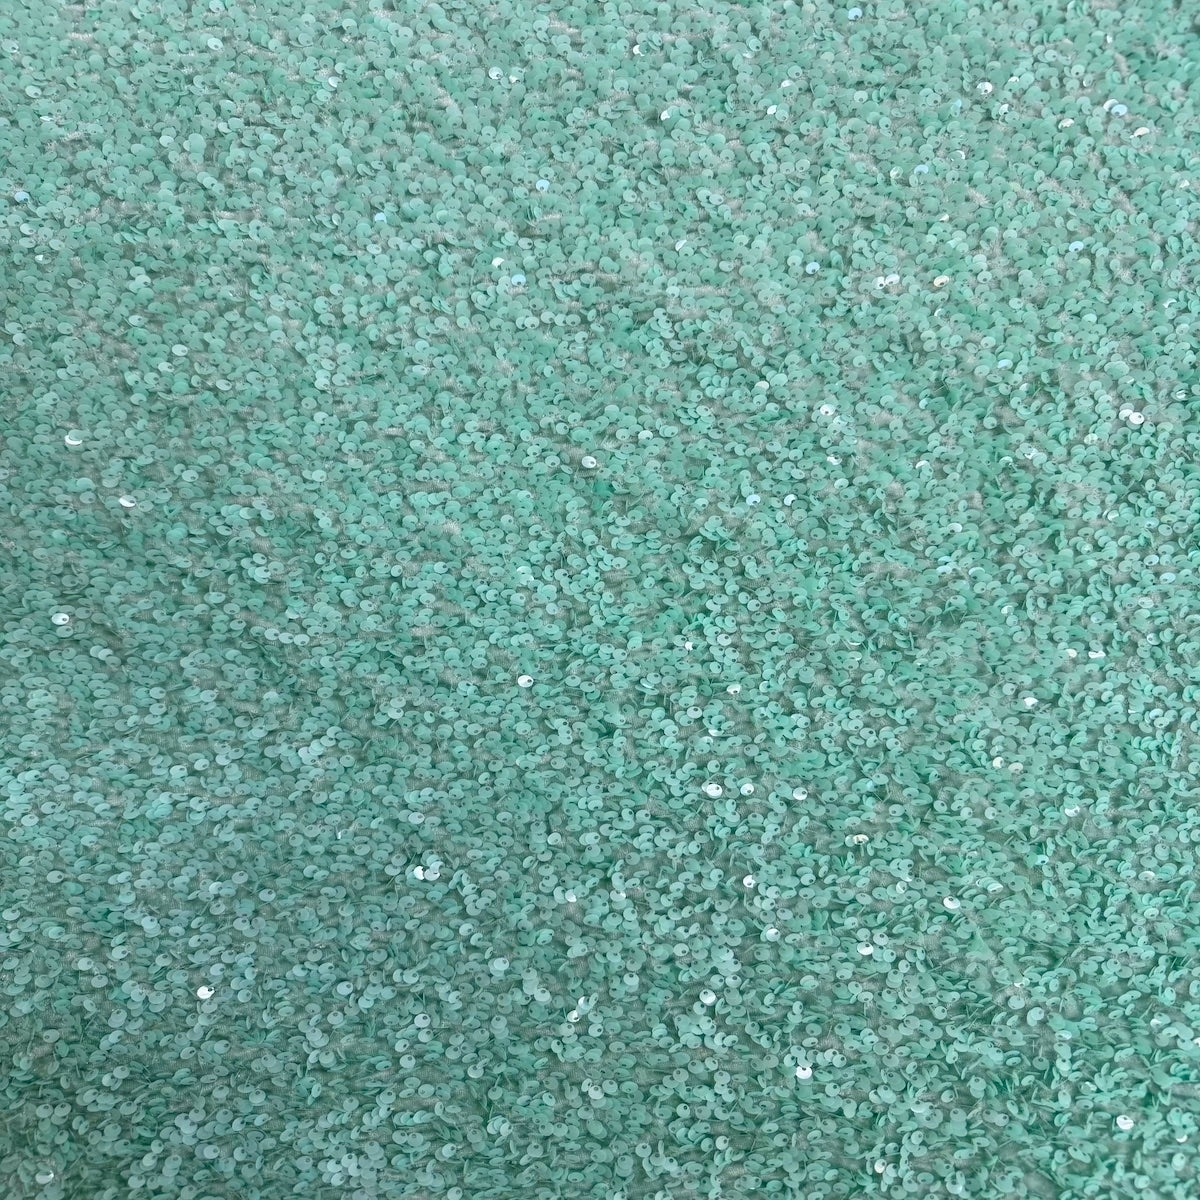 Mist Green Sequins Embroidered Stretch Velvet Rodeo Fabric